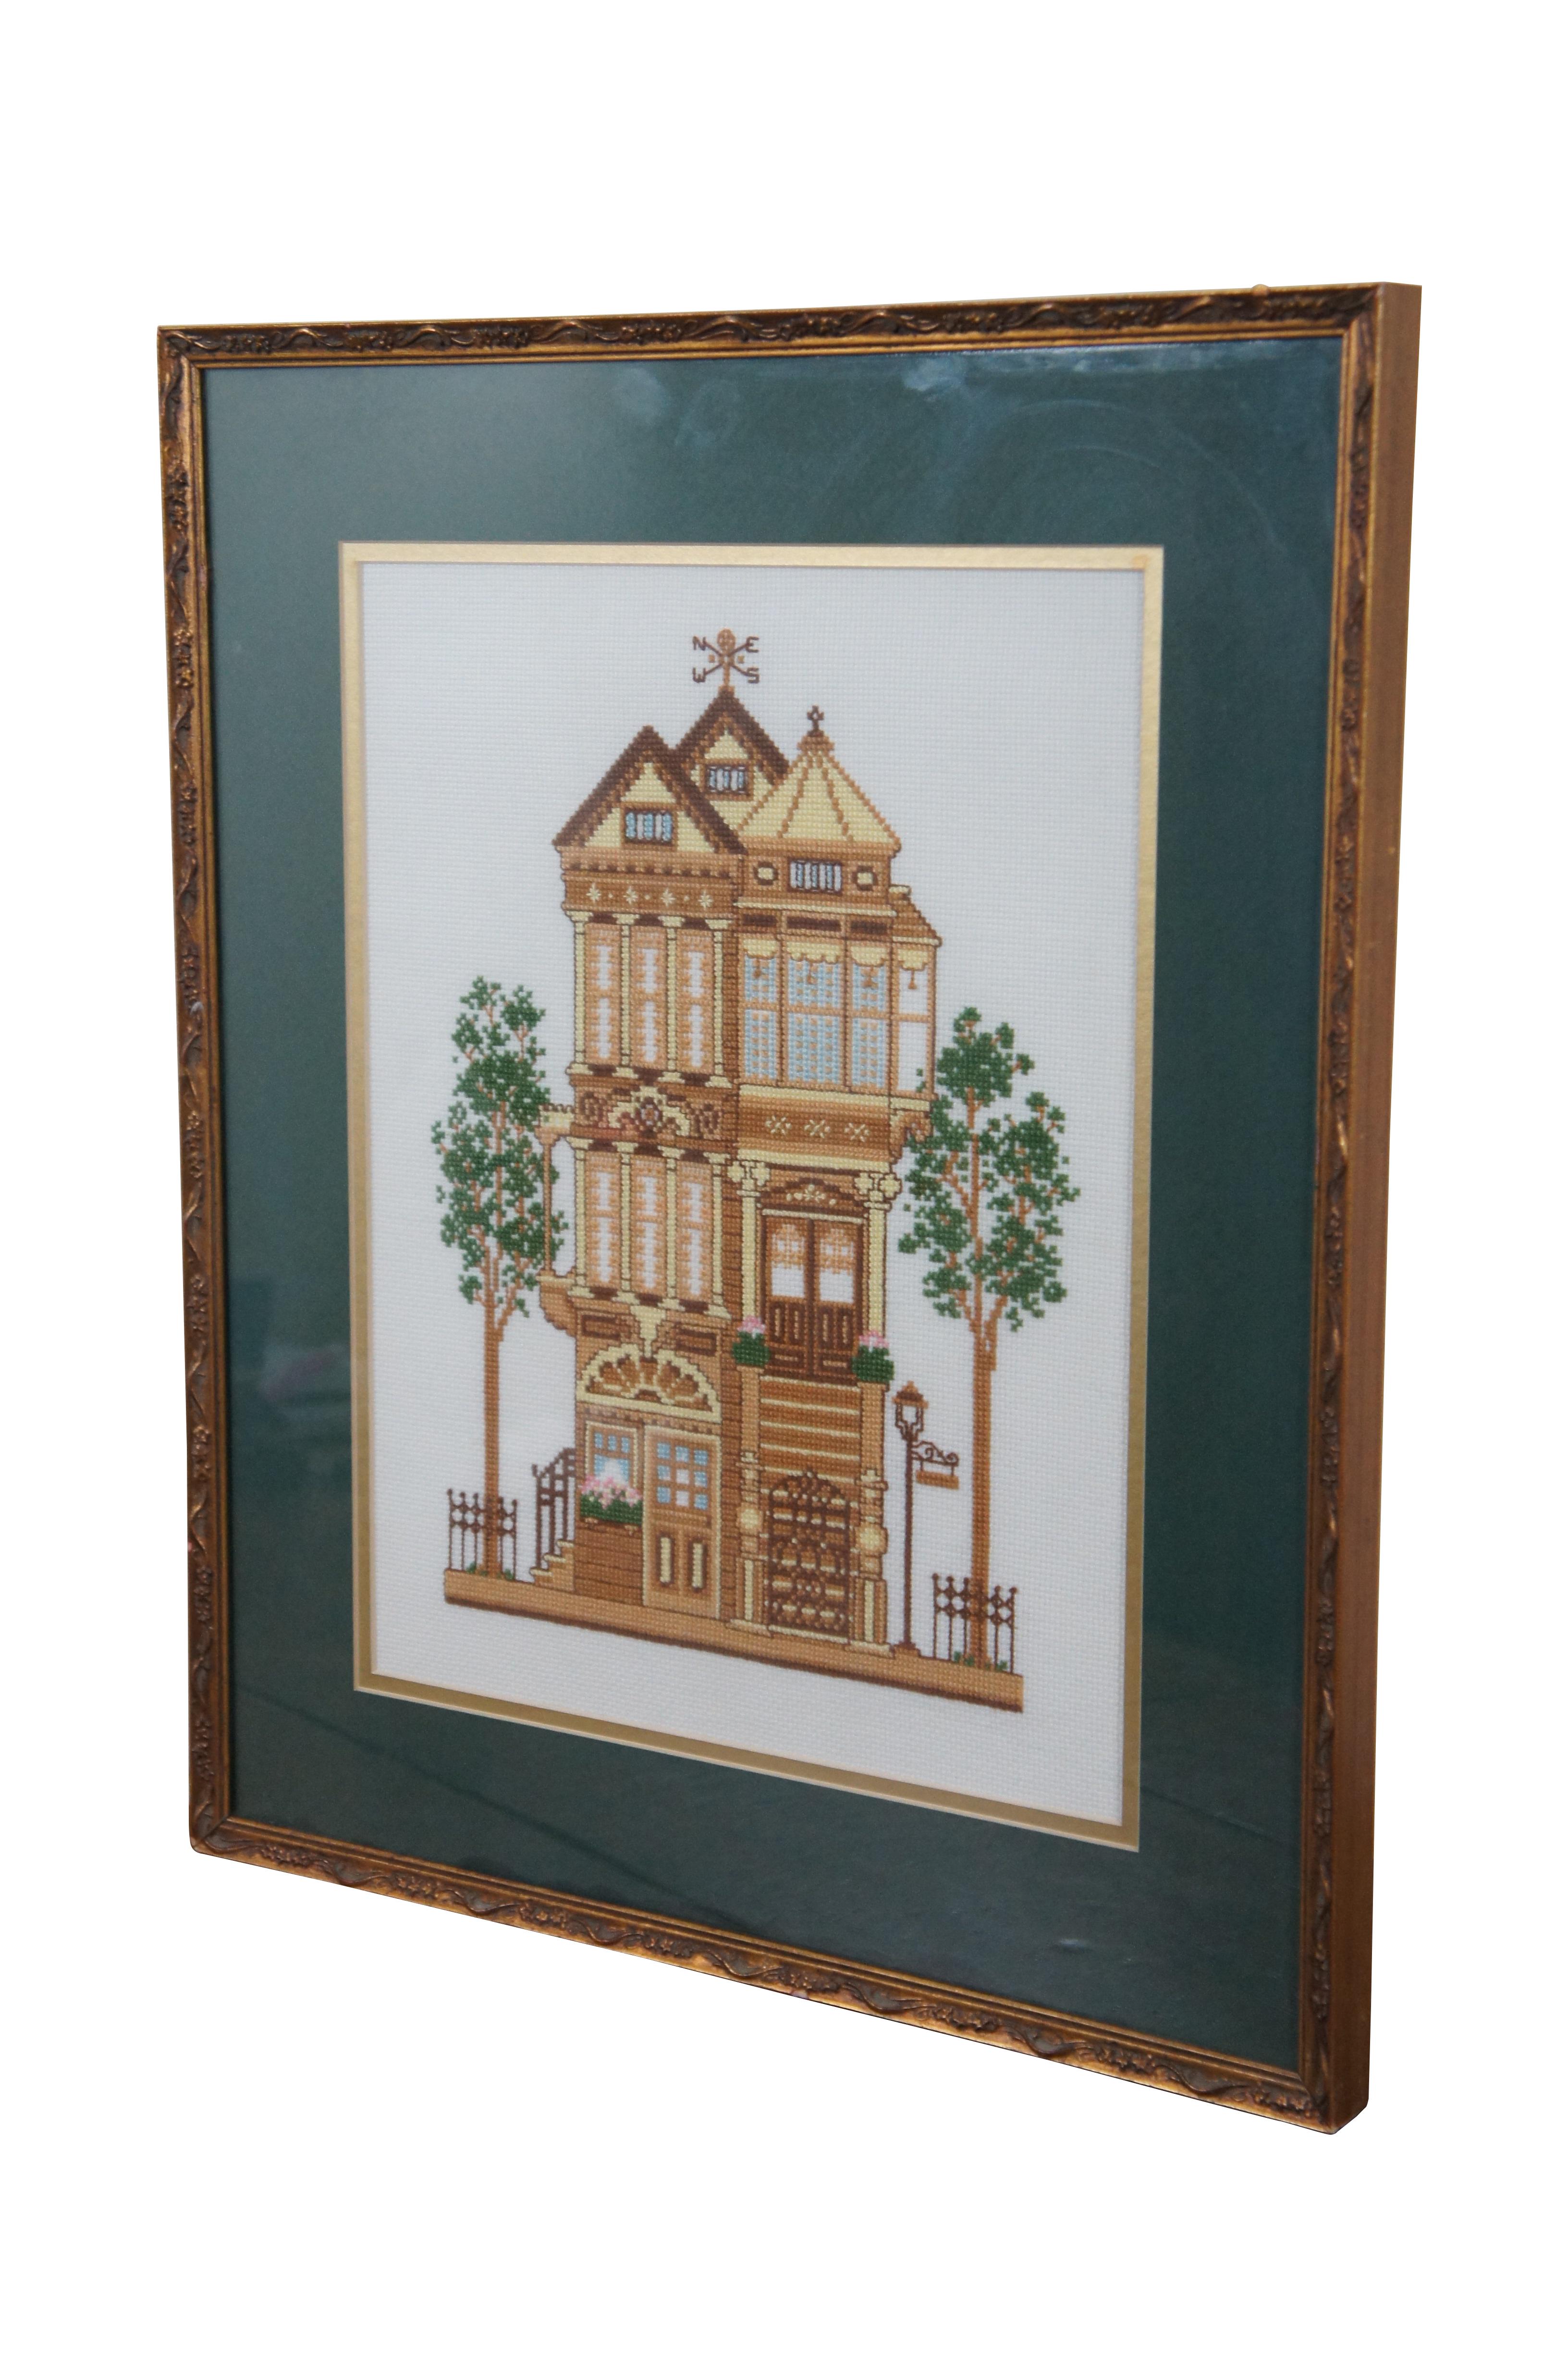 Framed piece of completed needlwork depicting a turn of the century yellow Victorian house, from the 1983 Sunset brand counted cross stitch kit #2945. Framed in a distressed gilded floral frame.

Dimensions:
16.75